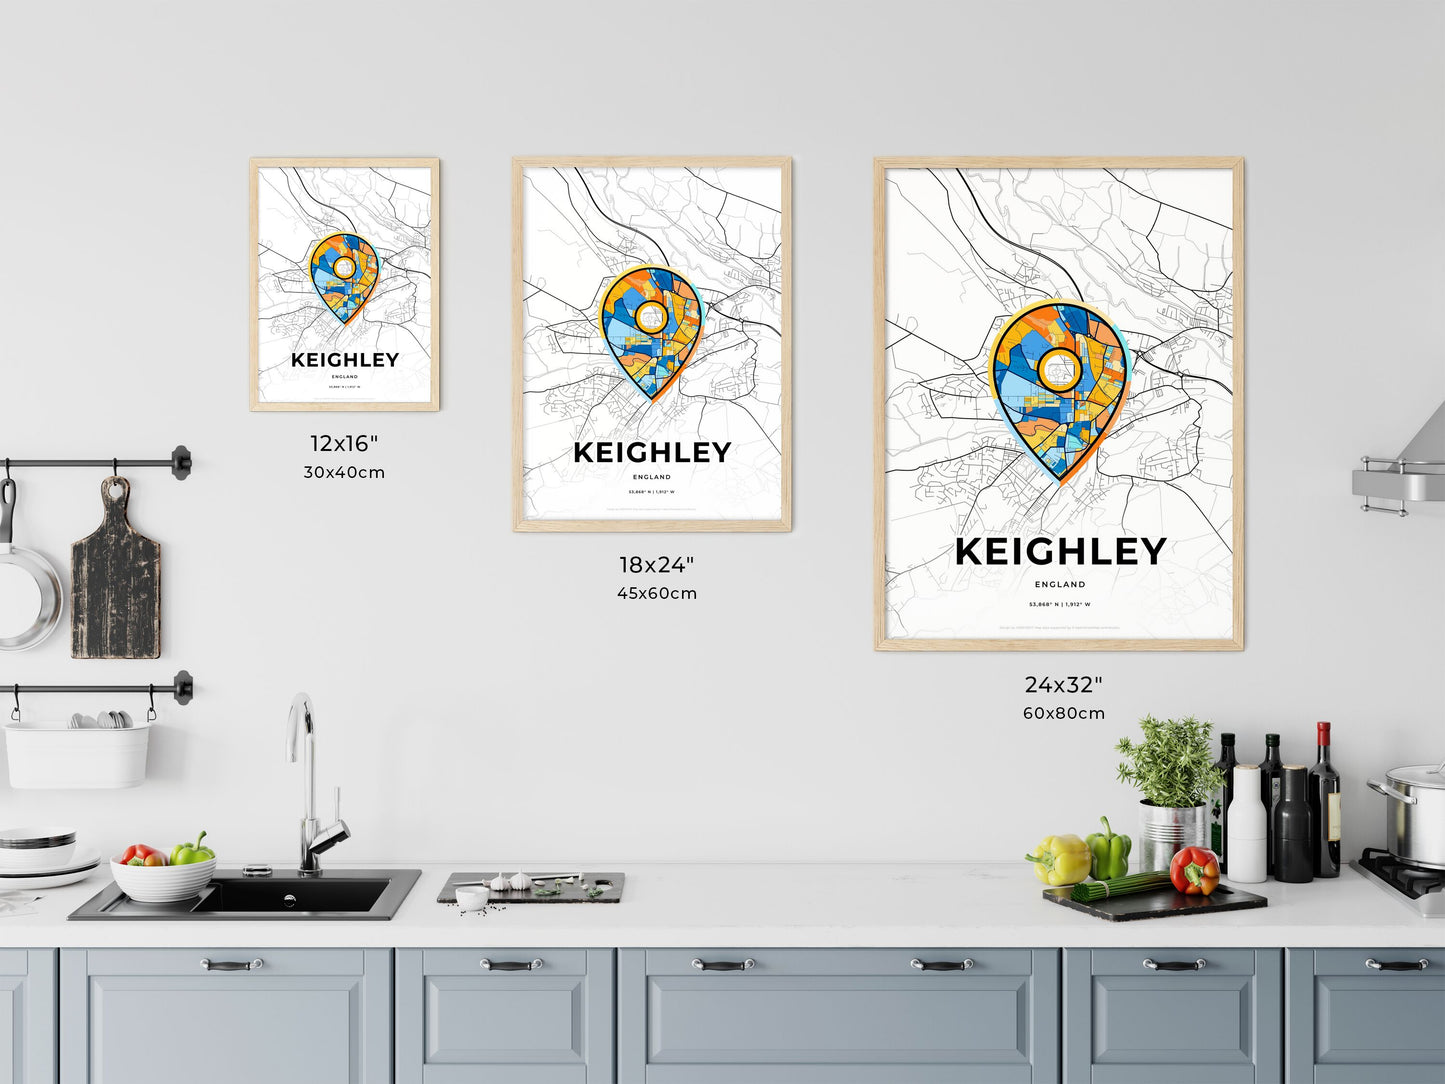 KEIGHLEY ENGLAND minimal art map with a colorful icon. Where it all began, Couple map gift.